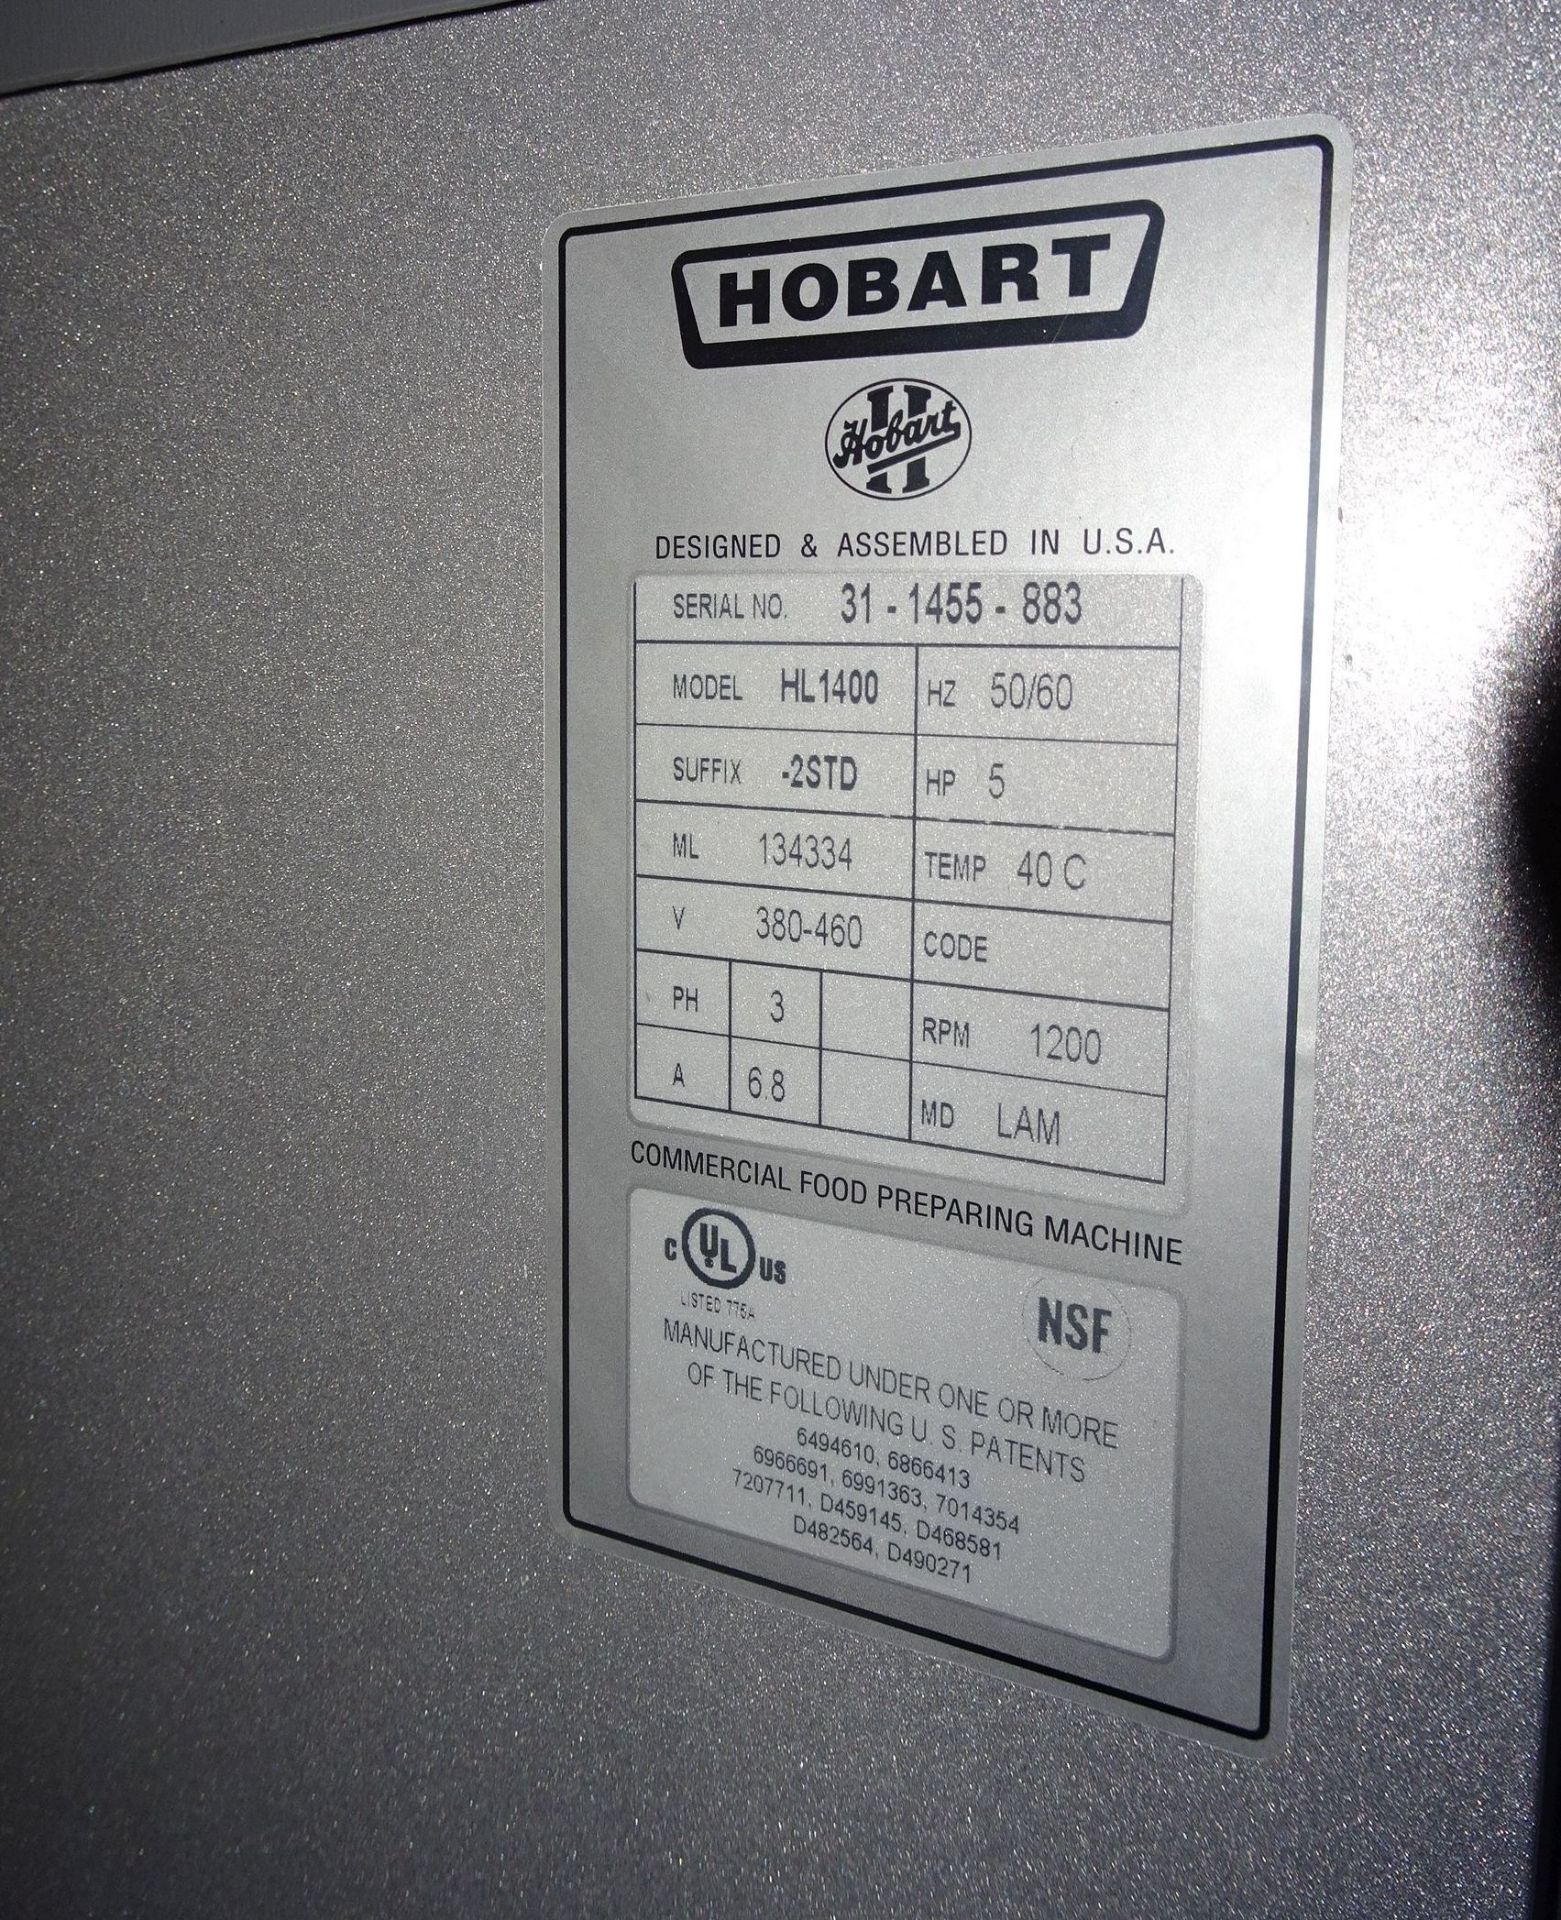 Hobart Legacy Model HL1400-2STD 140 Quart Planetary Mixer Unused in crate - Image 5 of 6